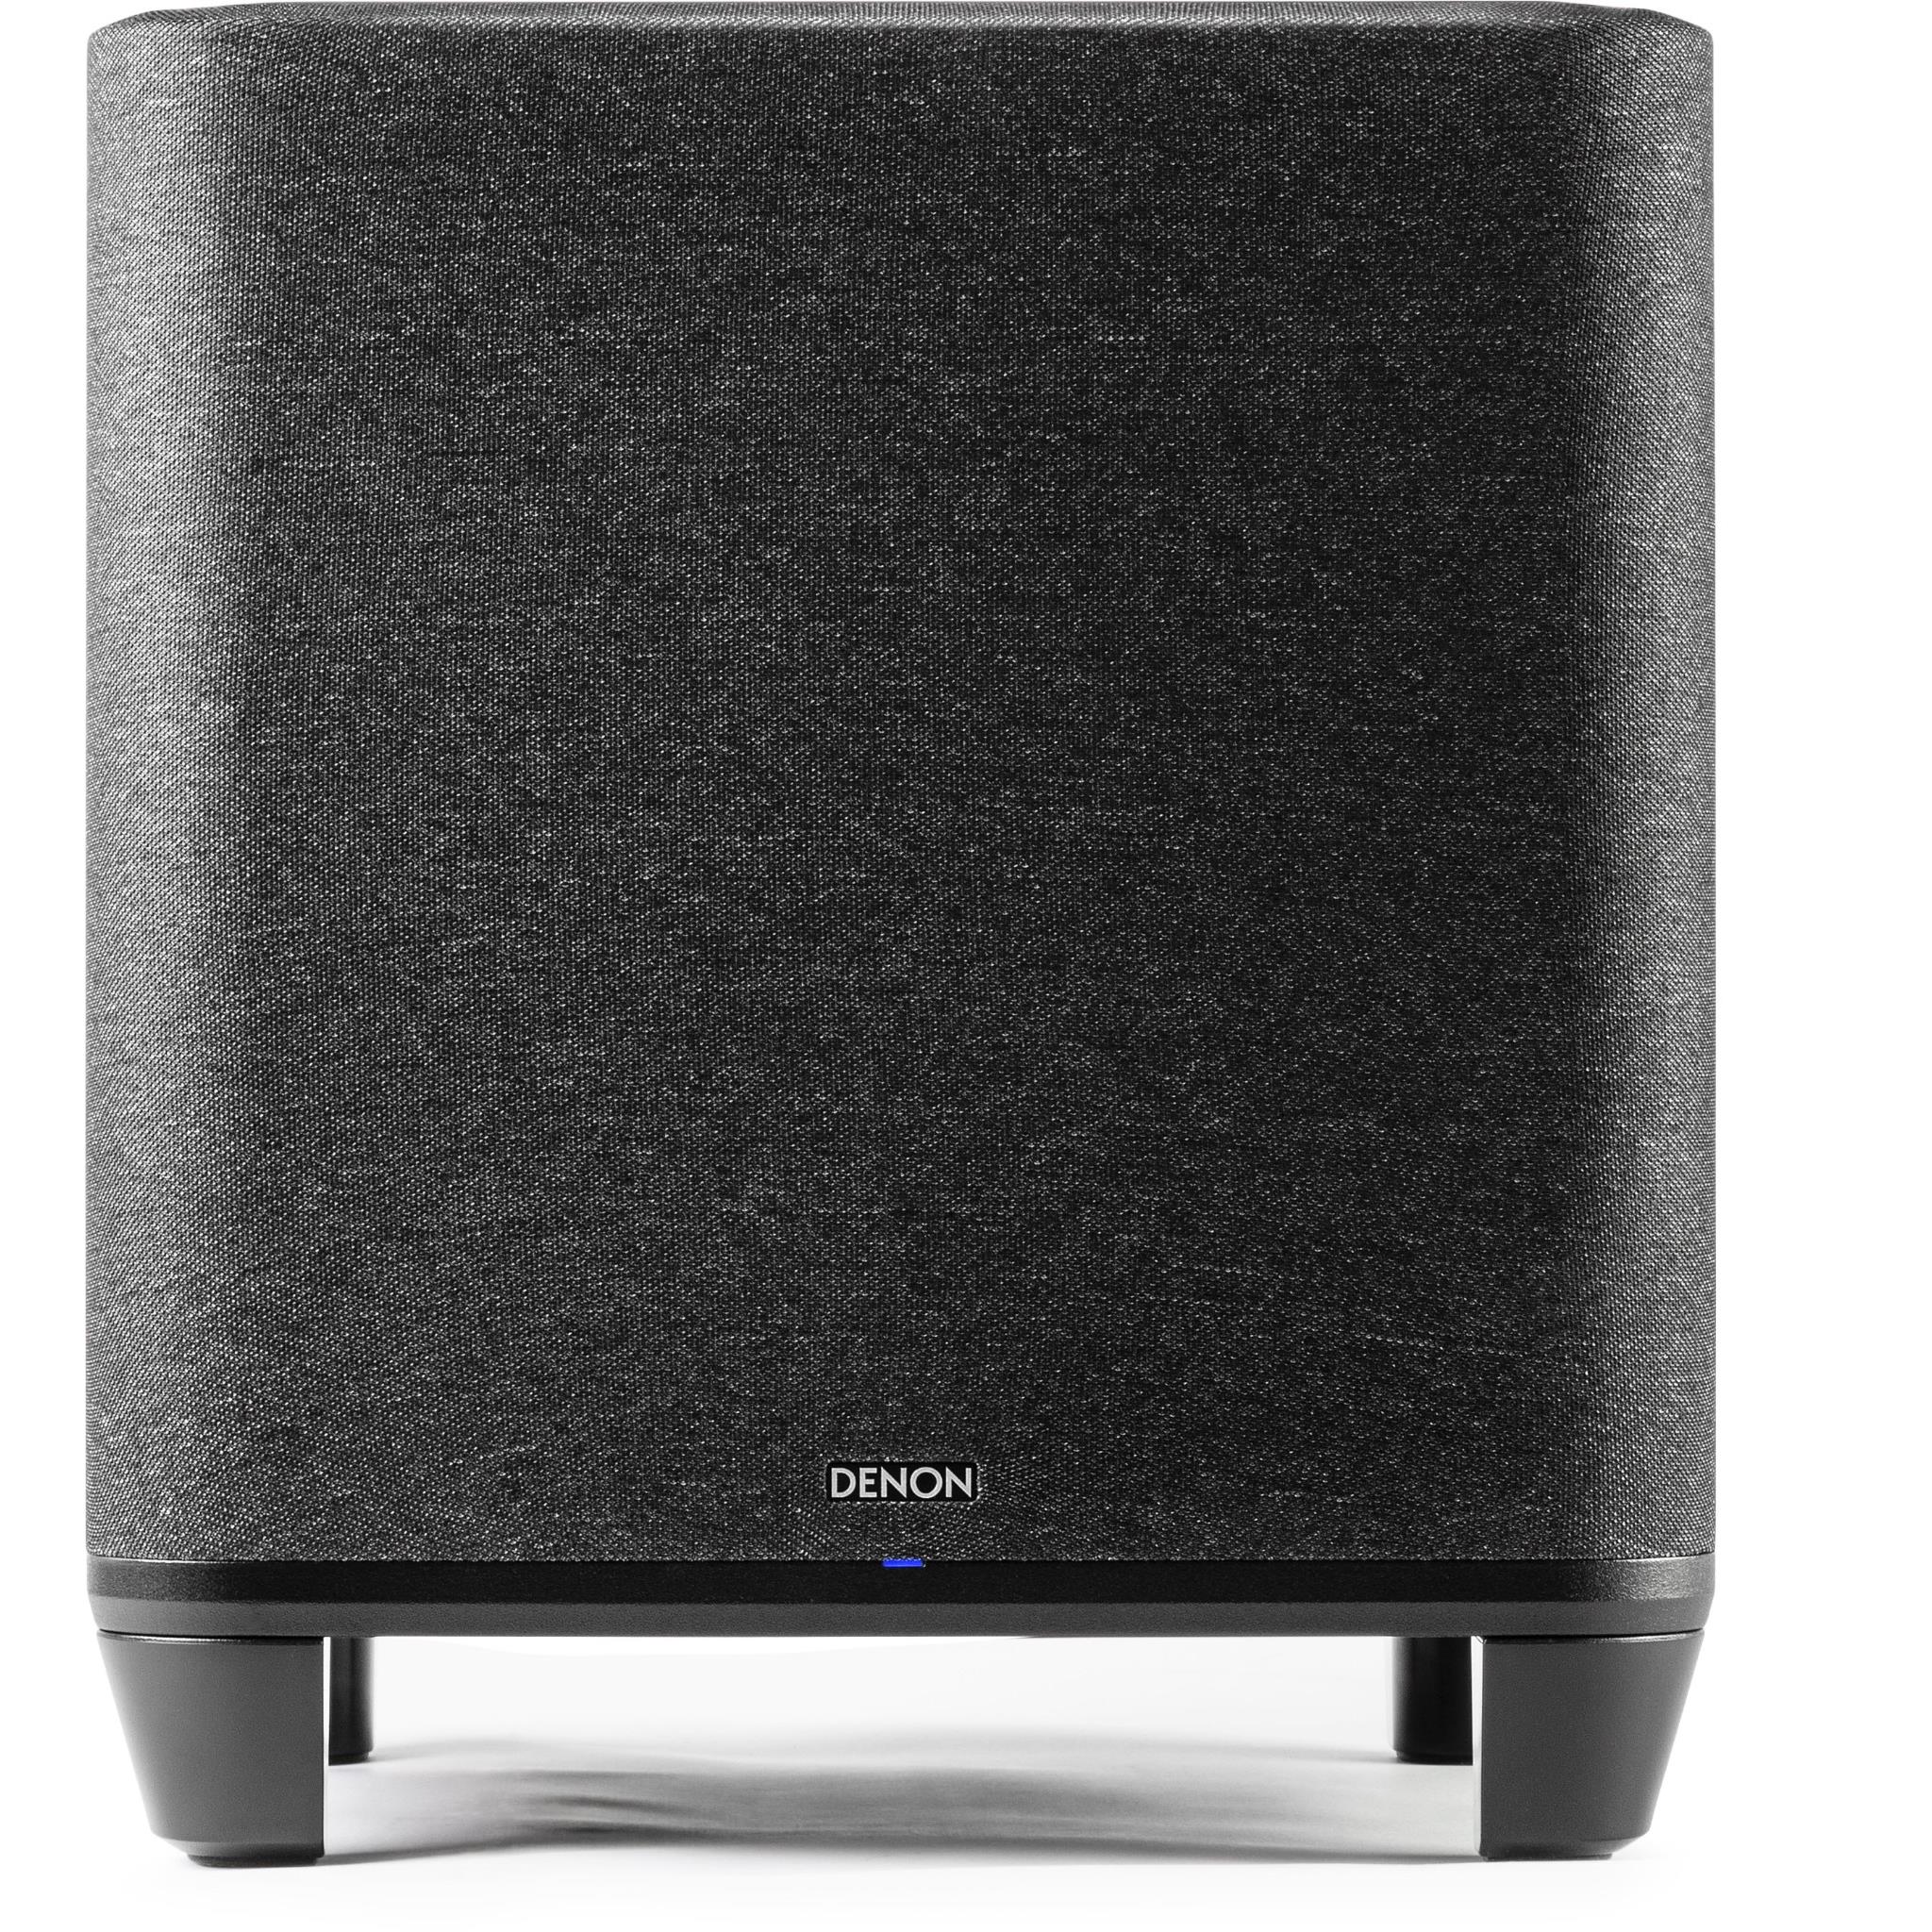 denon wireless sub woofer with heos built-in